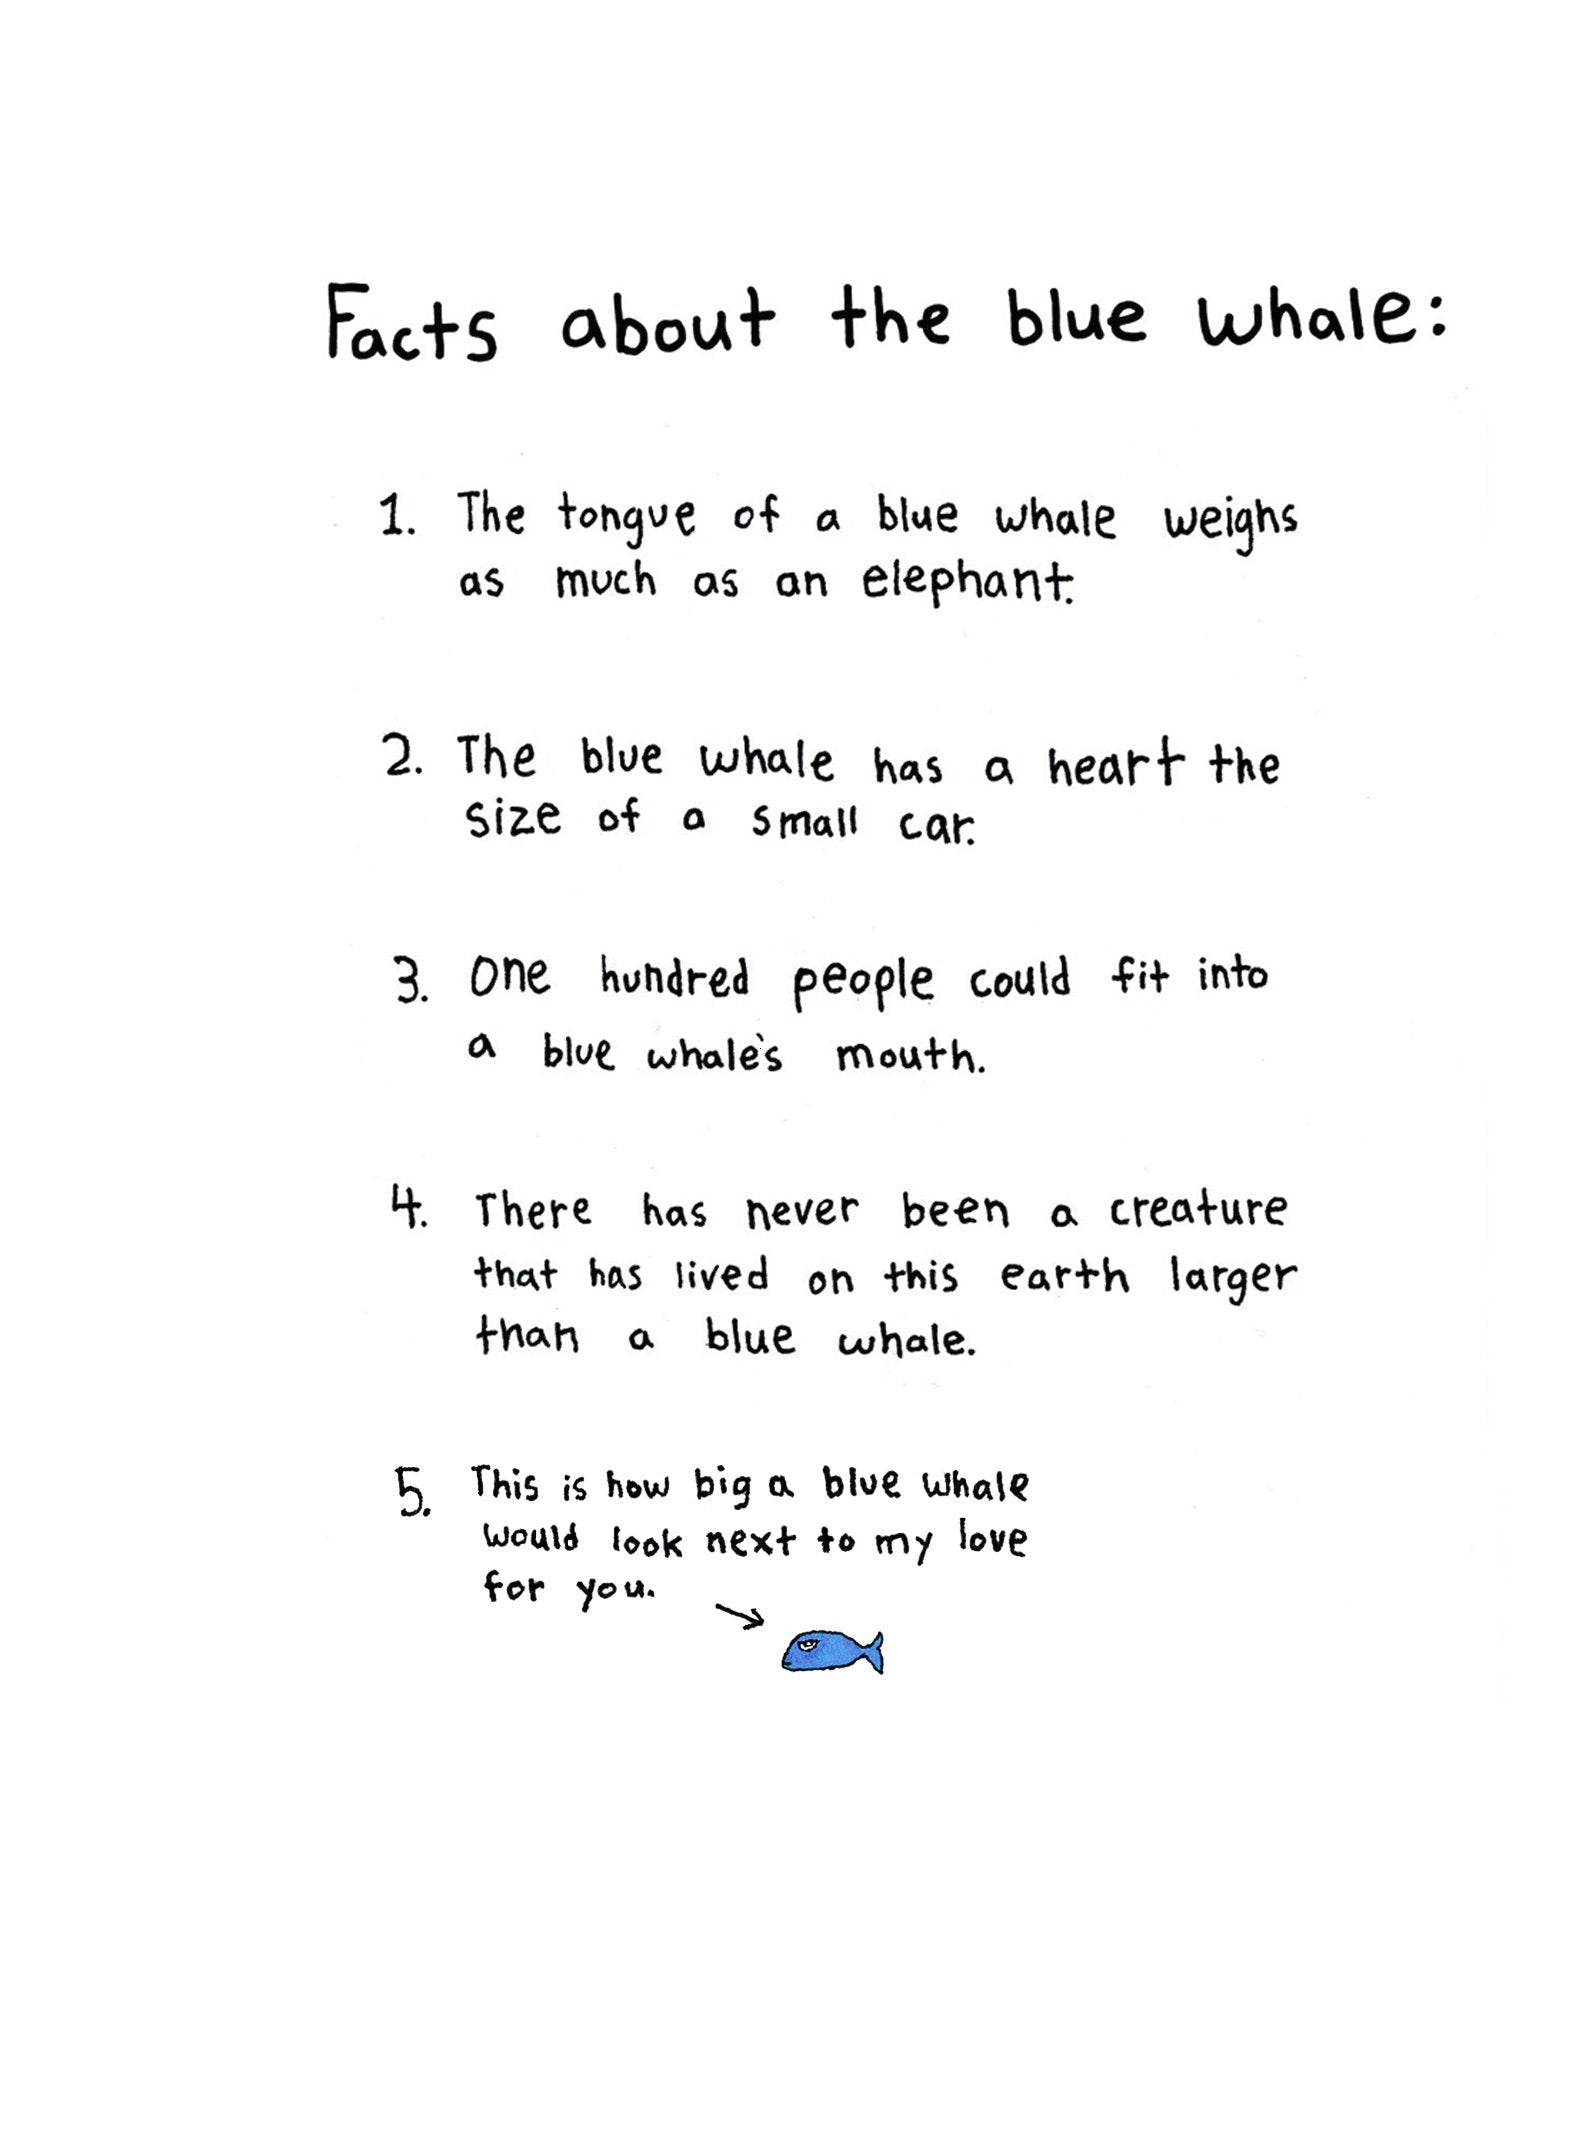 Facts about a blue whale